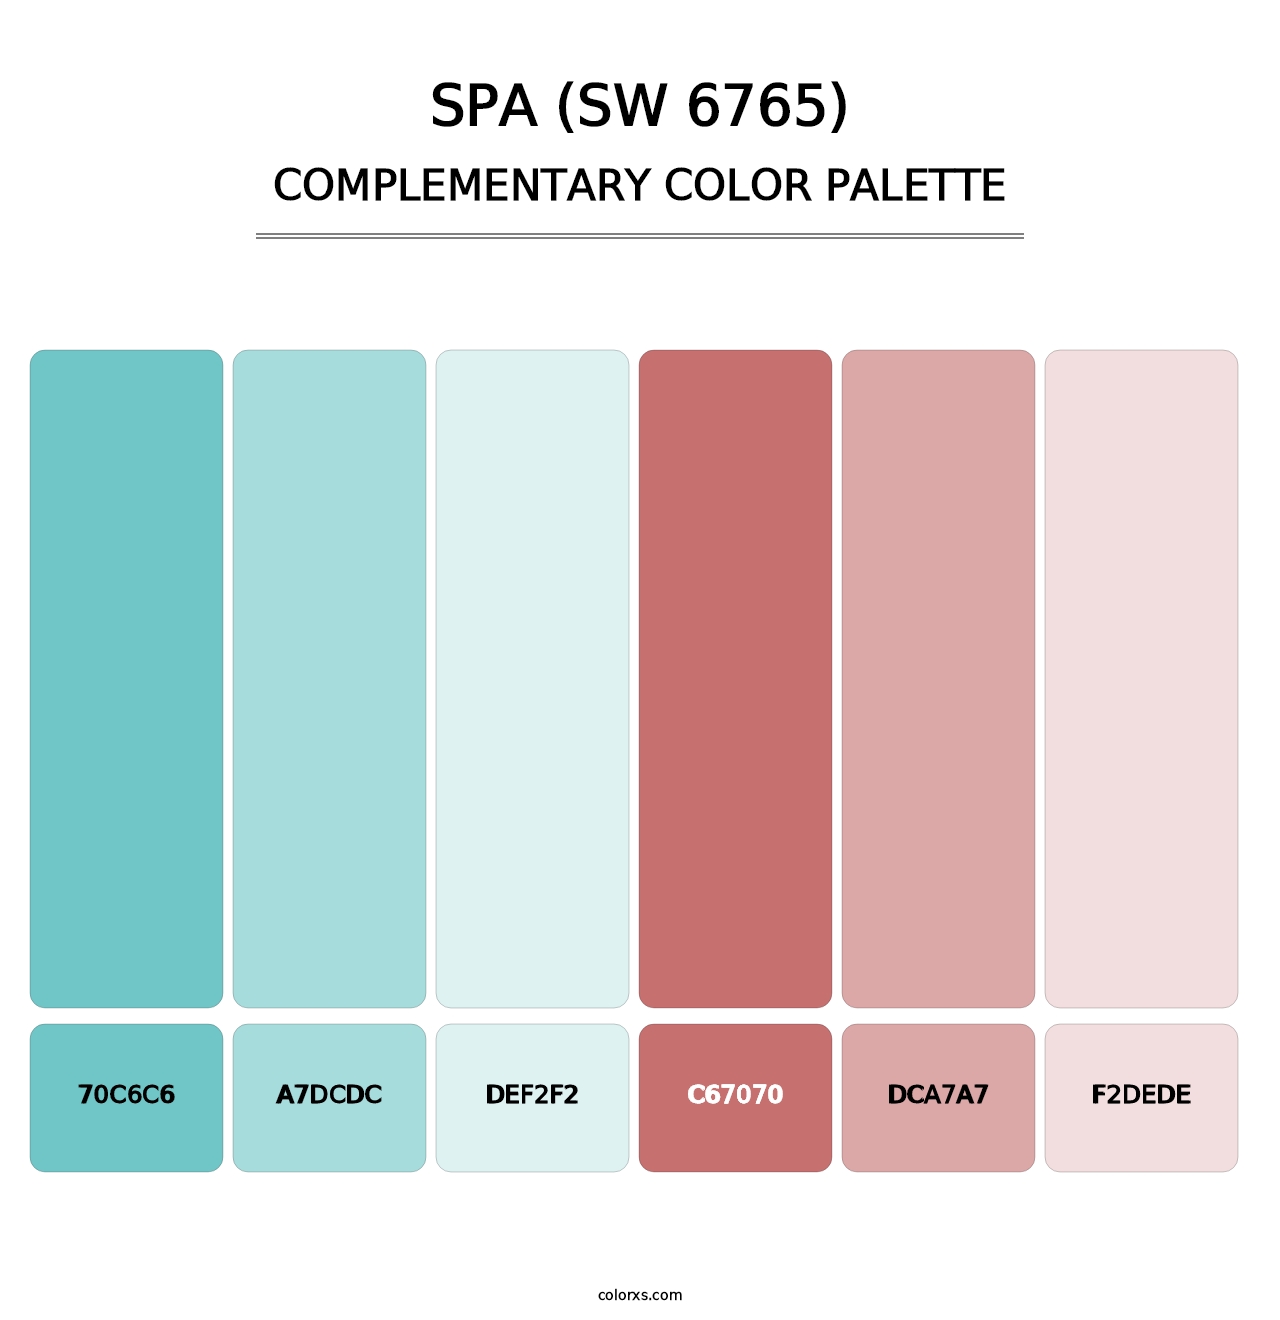 Spa (SW 6765) - Complementary Color Palette